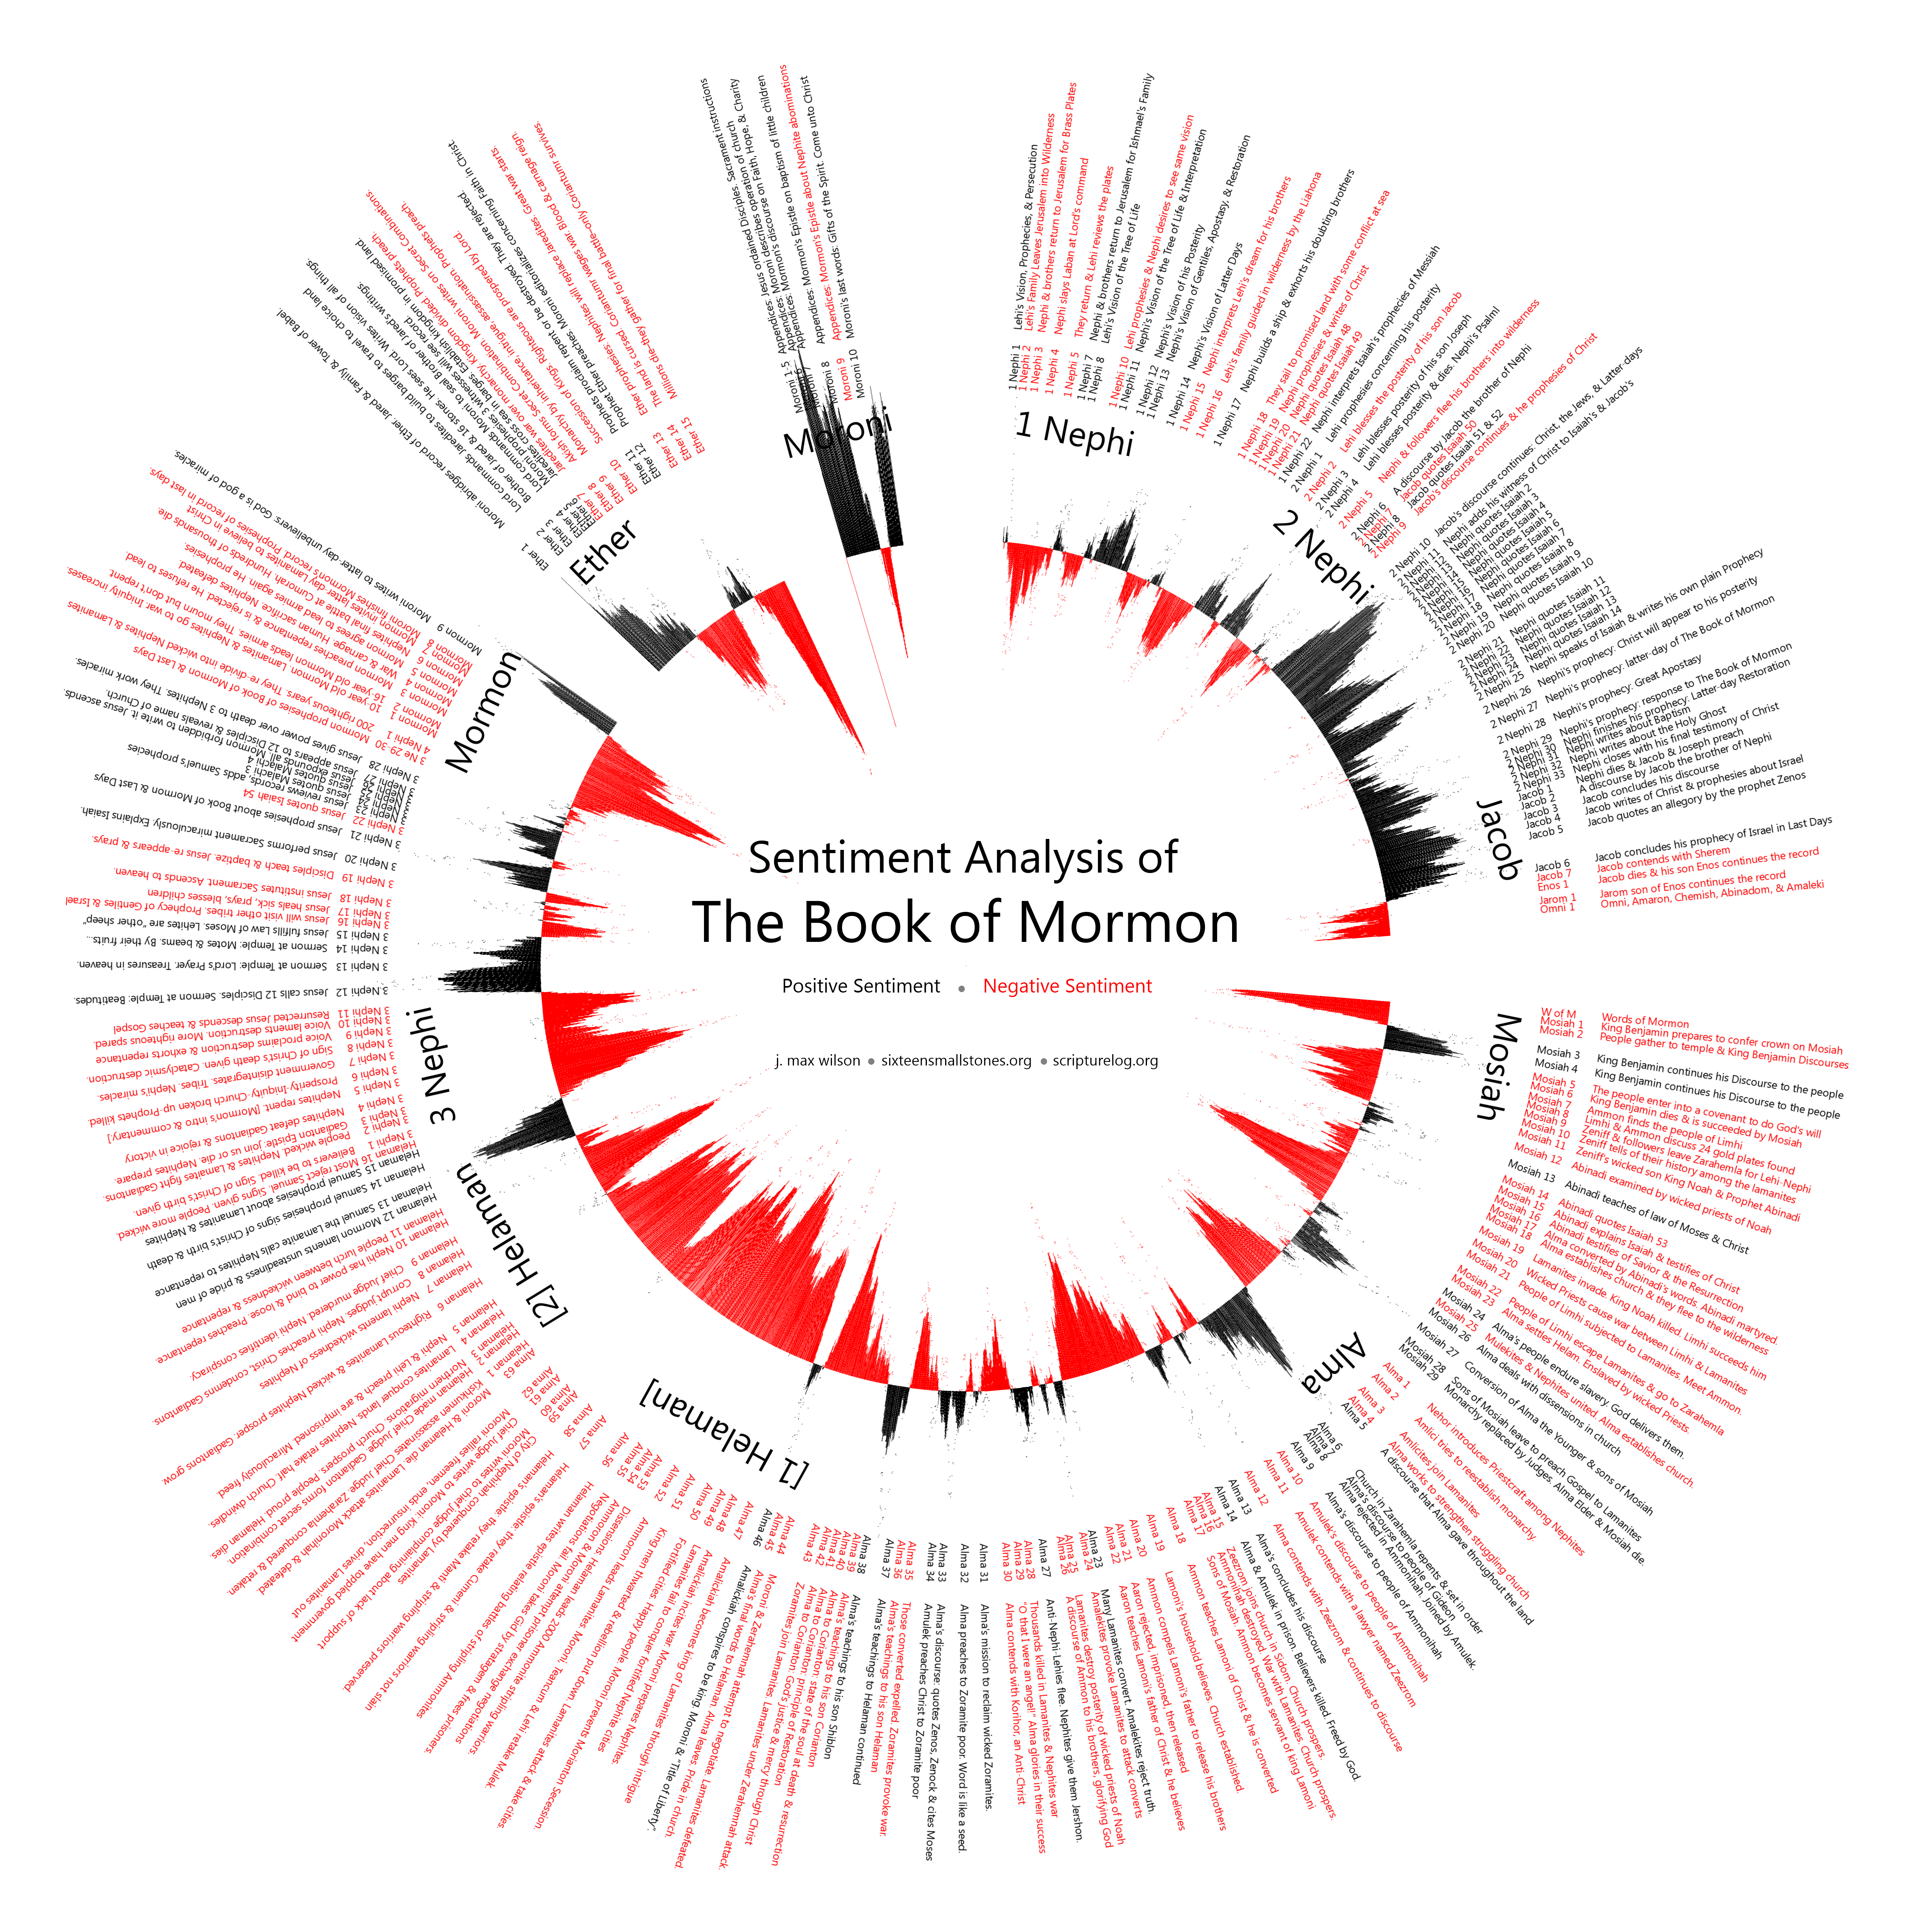 the book of mormon for geeks: sentiment analysis of the book of